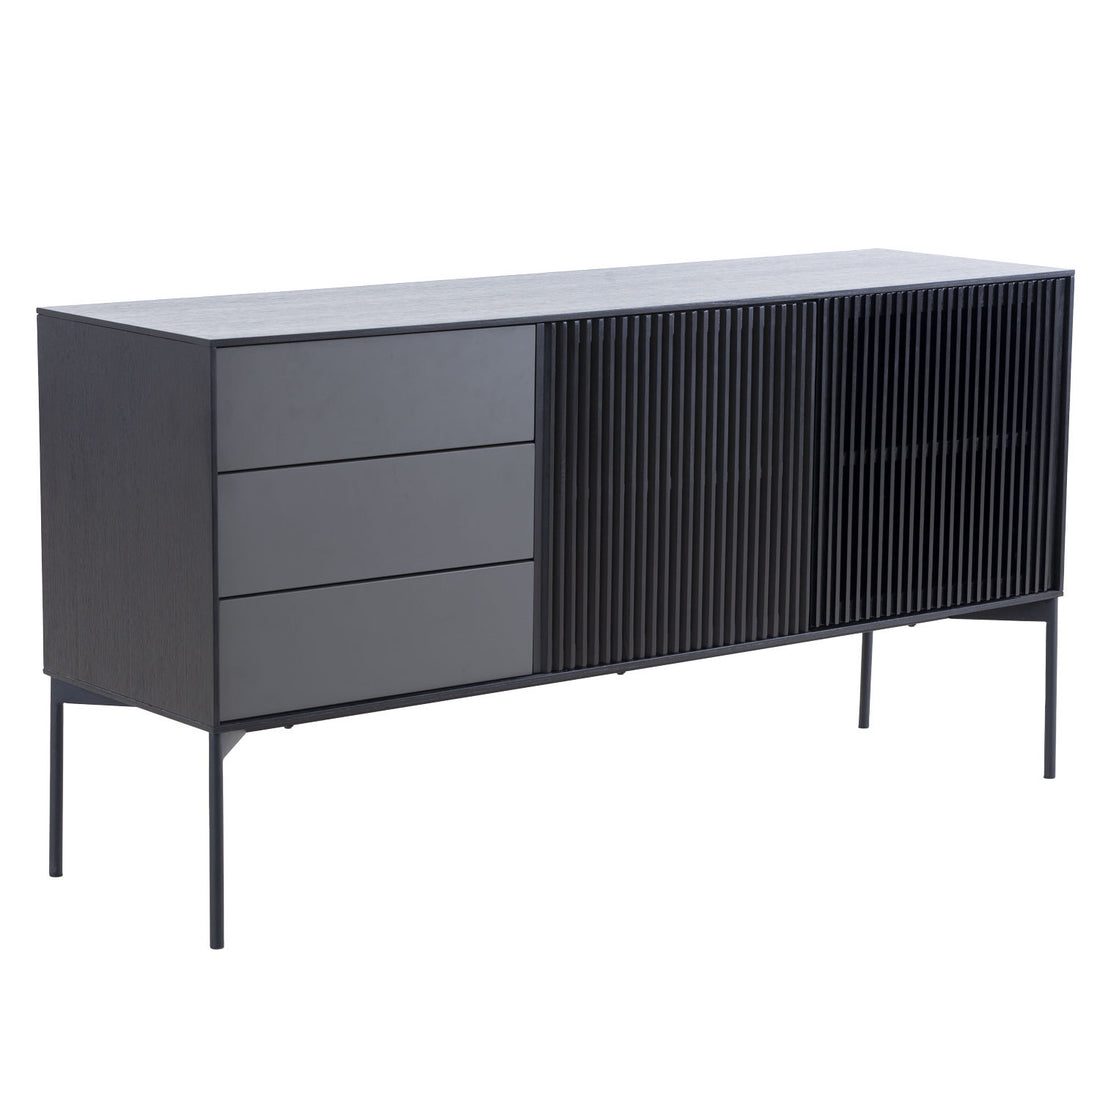 62.4" Mid Century Sideboard Cabinet Buffet Table black-wood + stainless steel